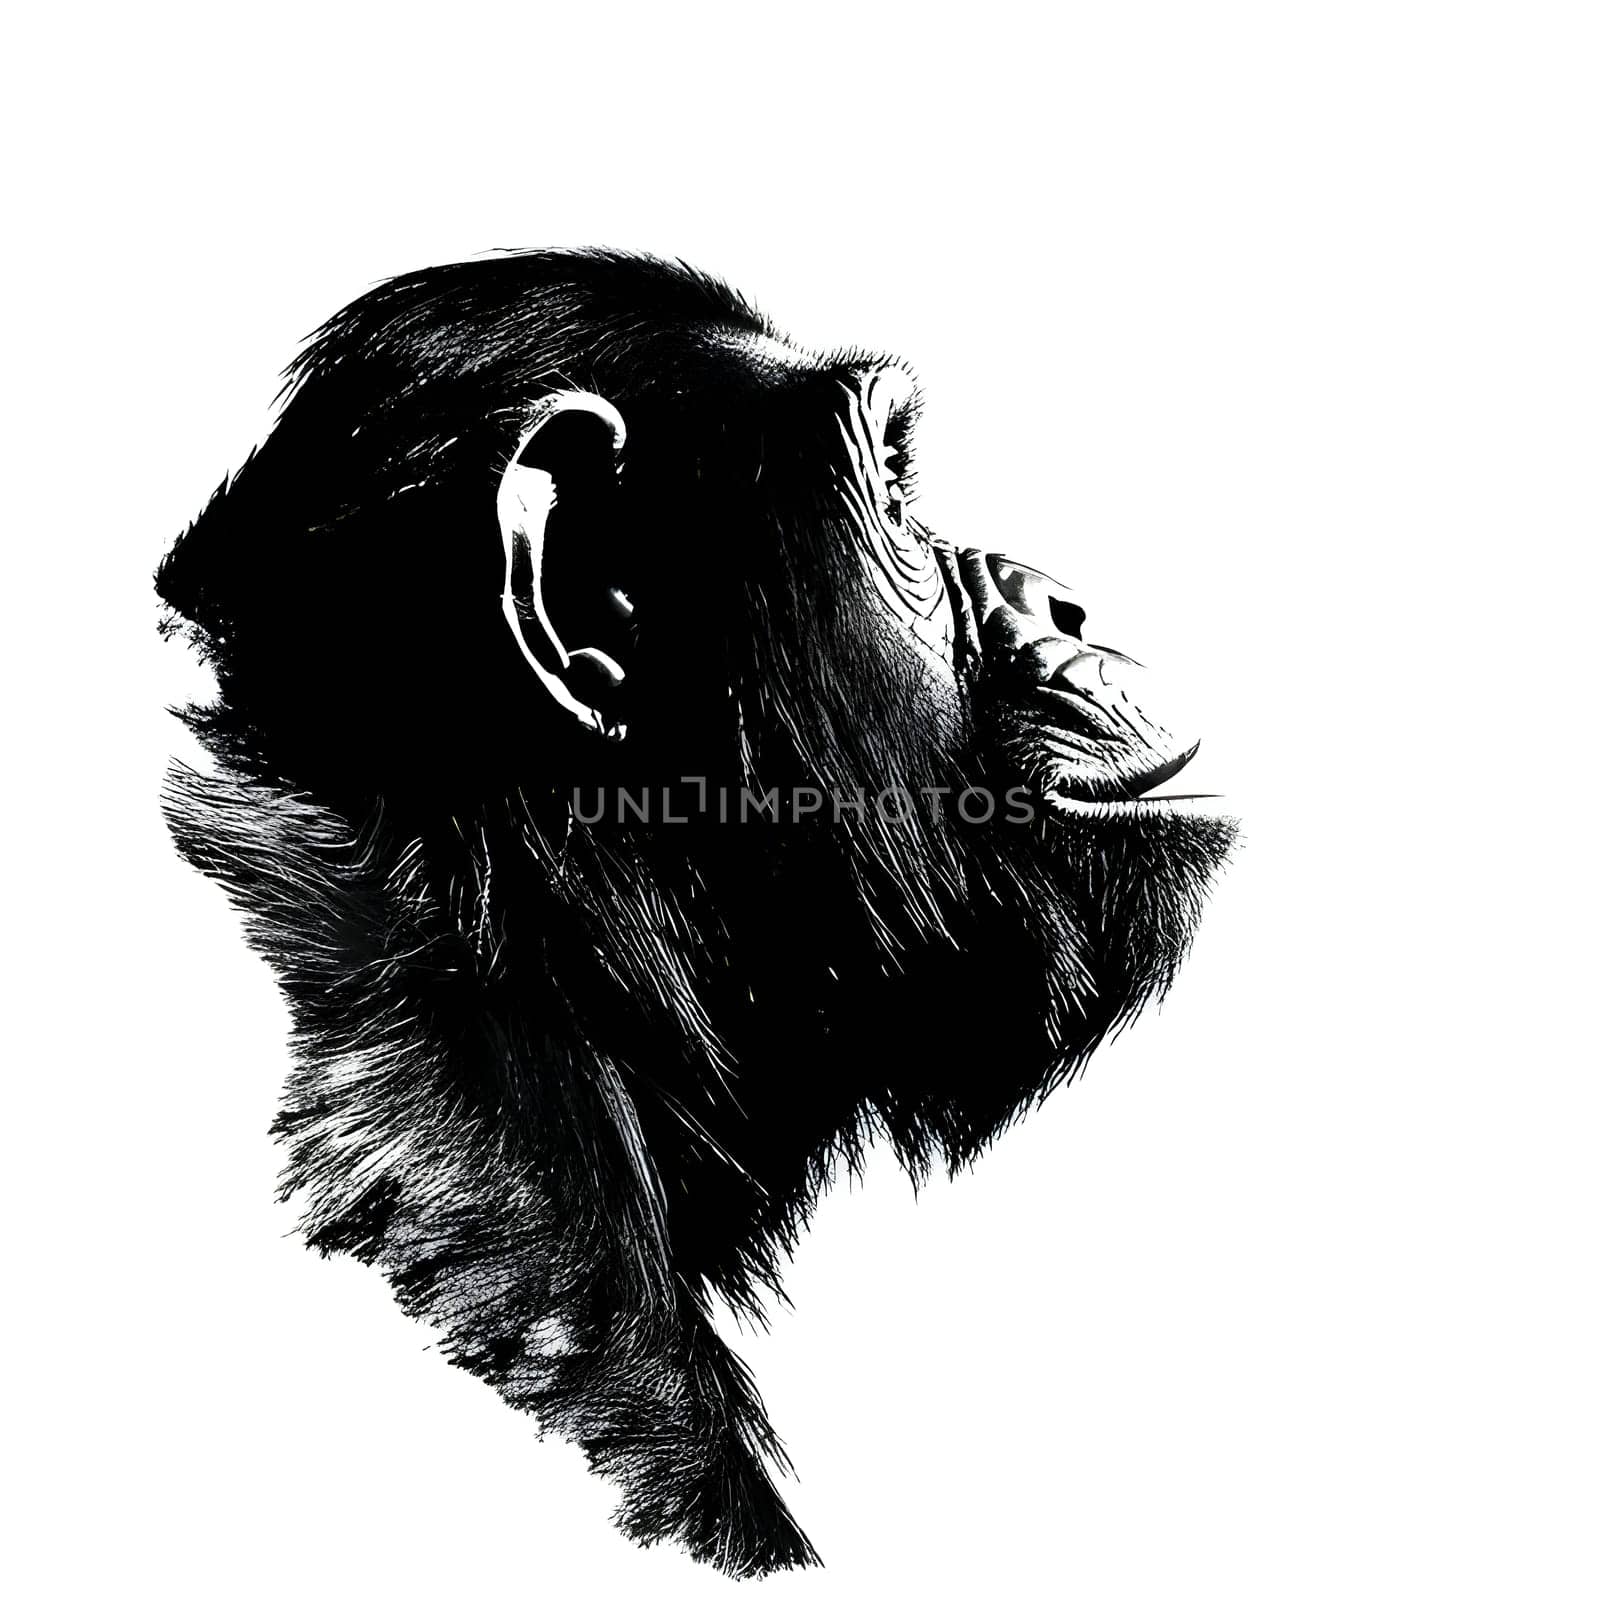 Vector illustration of a chimpanzee in black silhouette against a clean white background, capturing graceful forms.